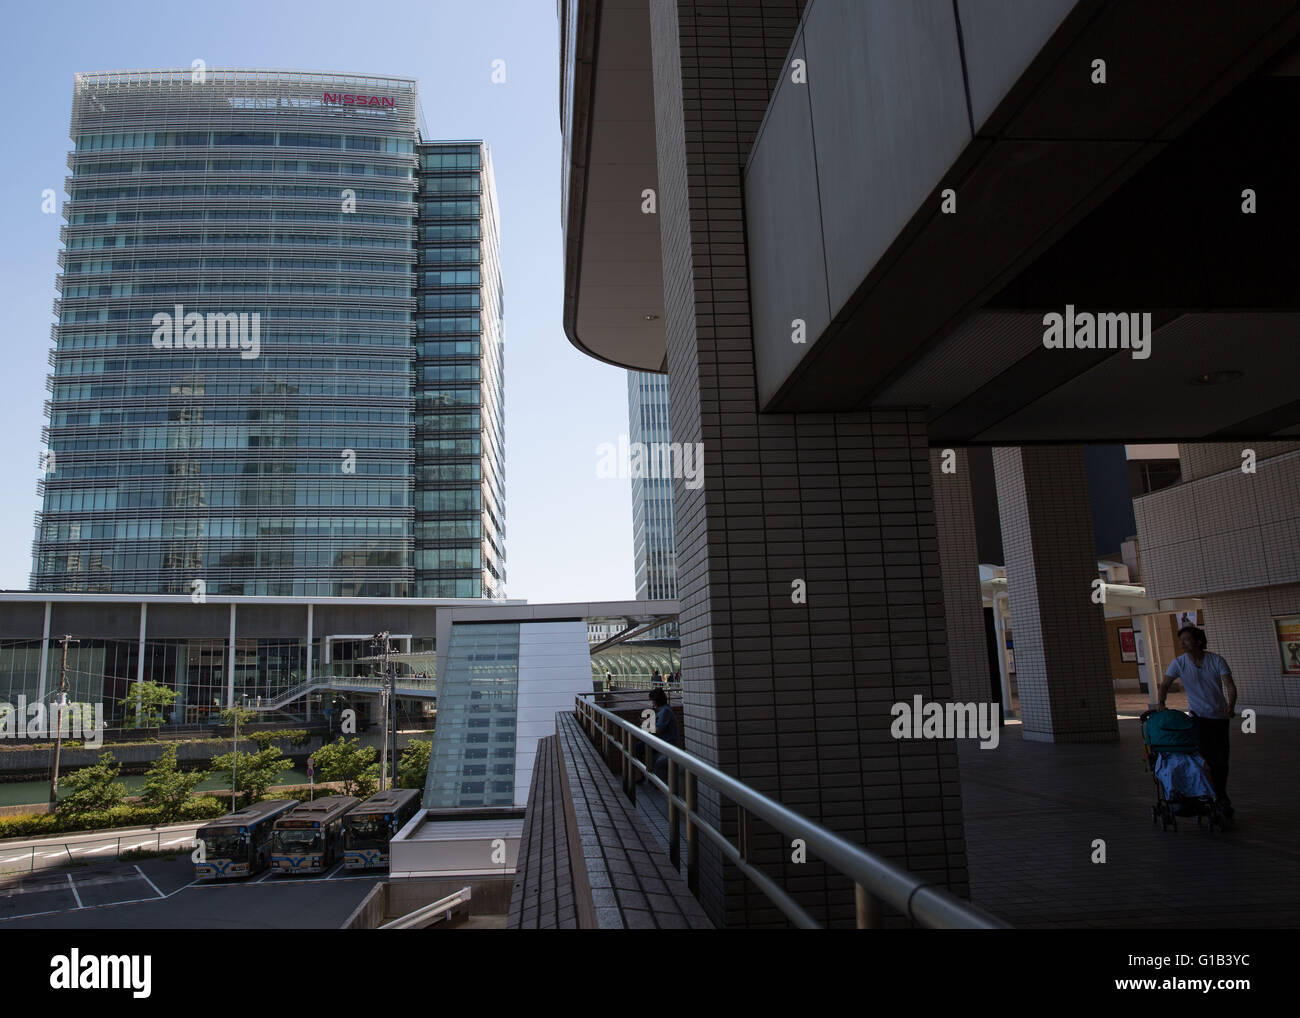 May 12, 2016, Yokohama, Japan - In this photo released on May 13, 2016, shows a view of the Nissan Motor Corporation headquarters in Yokohama, Japan. The Japanese automaker posted a $4.4 billion (523.8 billion yen) net income for FY 2015. (Photo by AFLO) Stock Photo